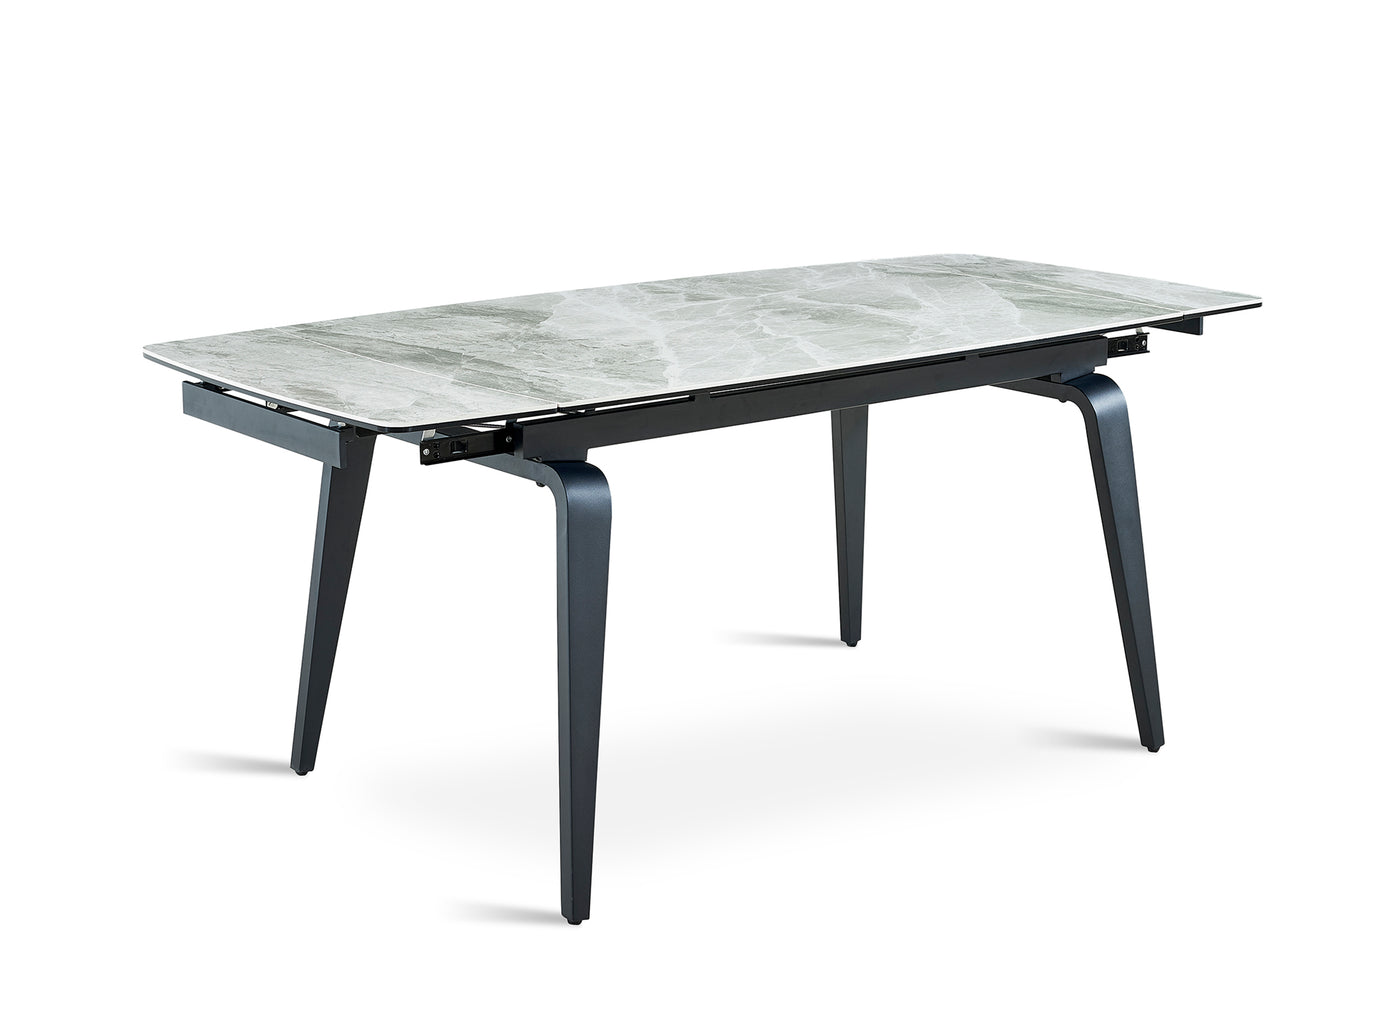 Kama Curve Legs Extensible Dining Table - Grey